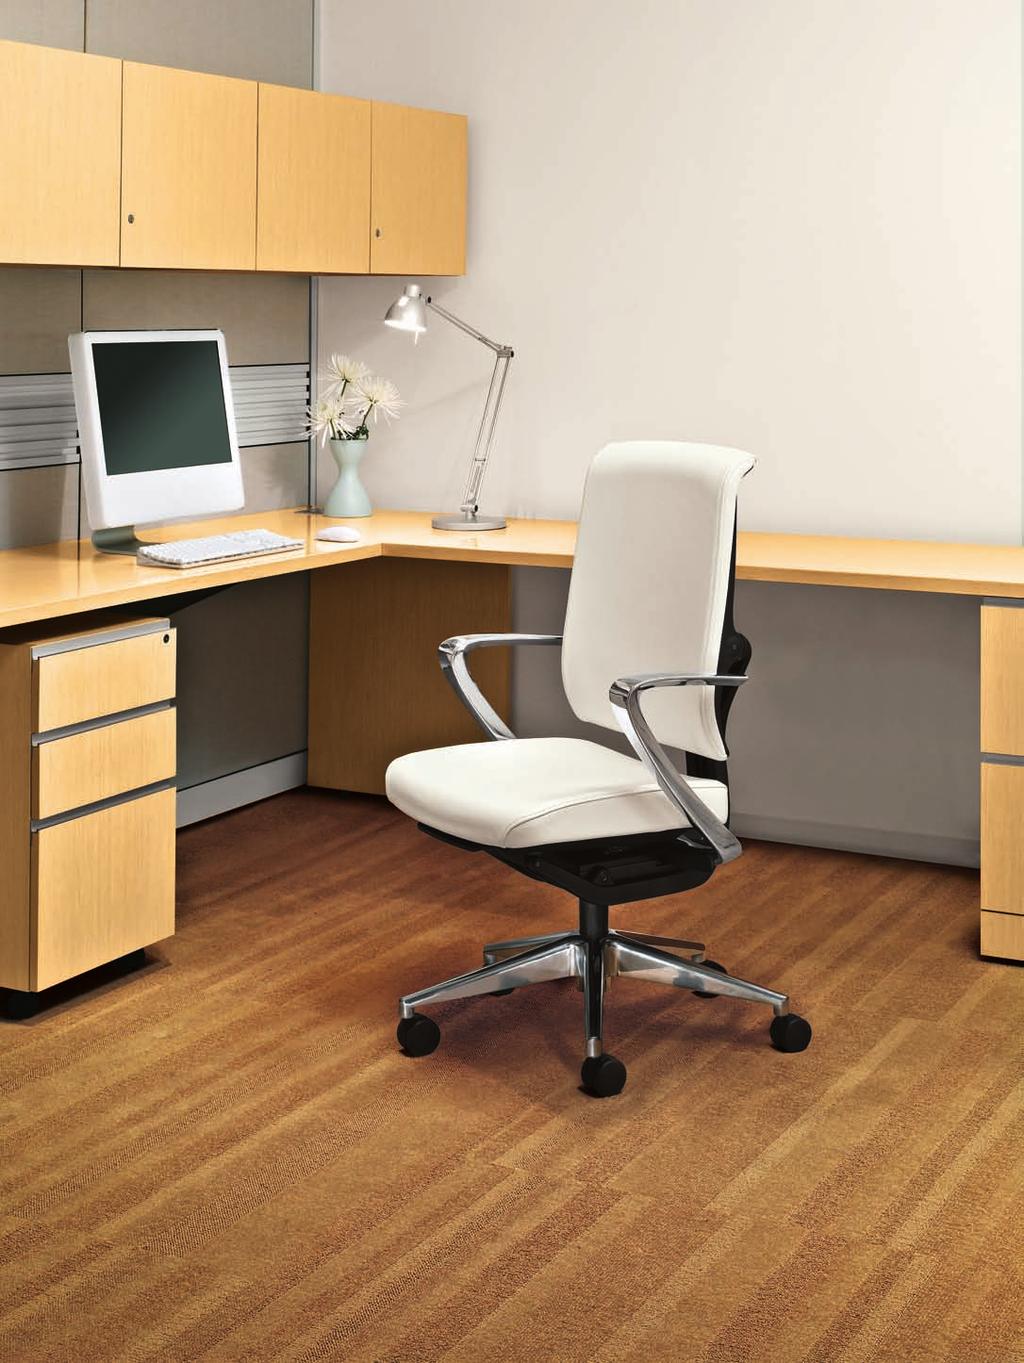 Open Office High-intensity work areas call for a work chair with adjustable arms that does not sacrifice